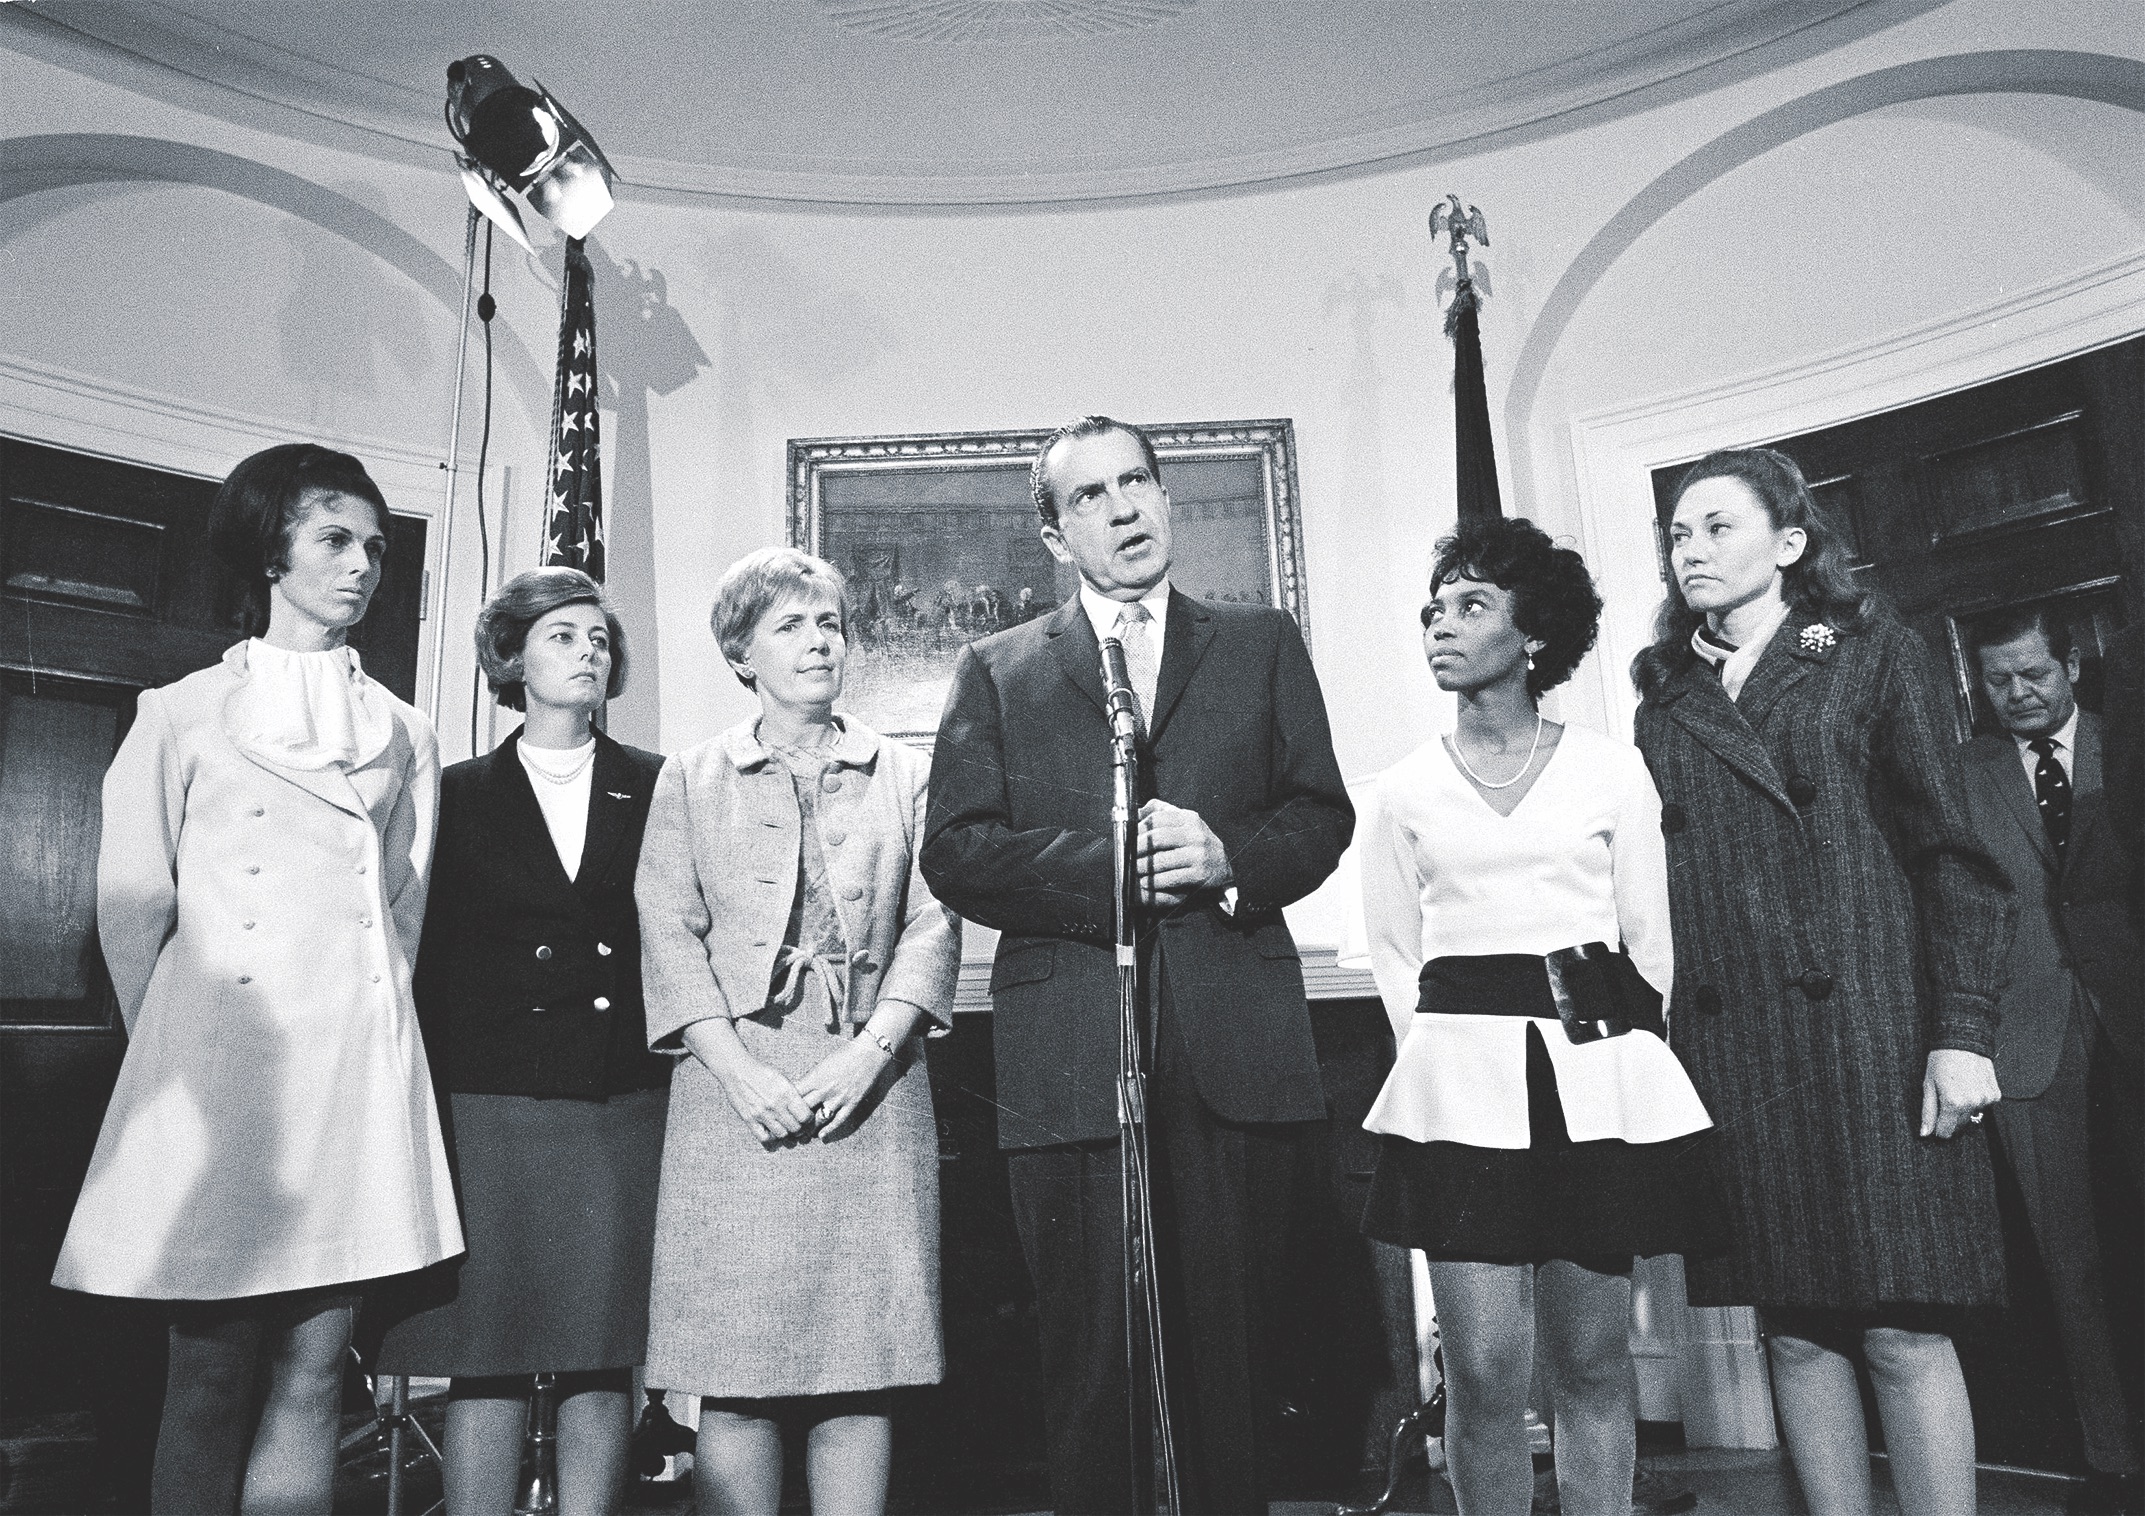 At a news conference on Dec. 12, 1969, Nixon, flanked by POW wives, lashed out at Hanoi for its mistreatment of prisoners. From left are Carol Hanson, Louise Mulligan, Sybil Stockdale, Andrea Rander and Pat Mearns. (AP Photo/Harvey Georges)